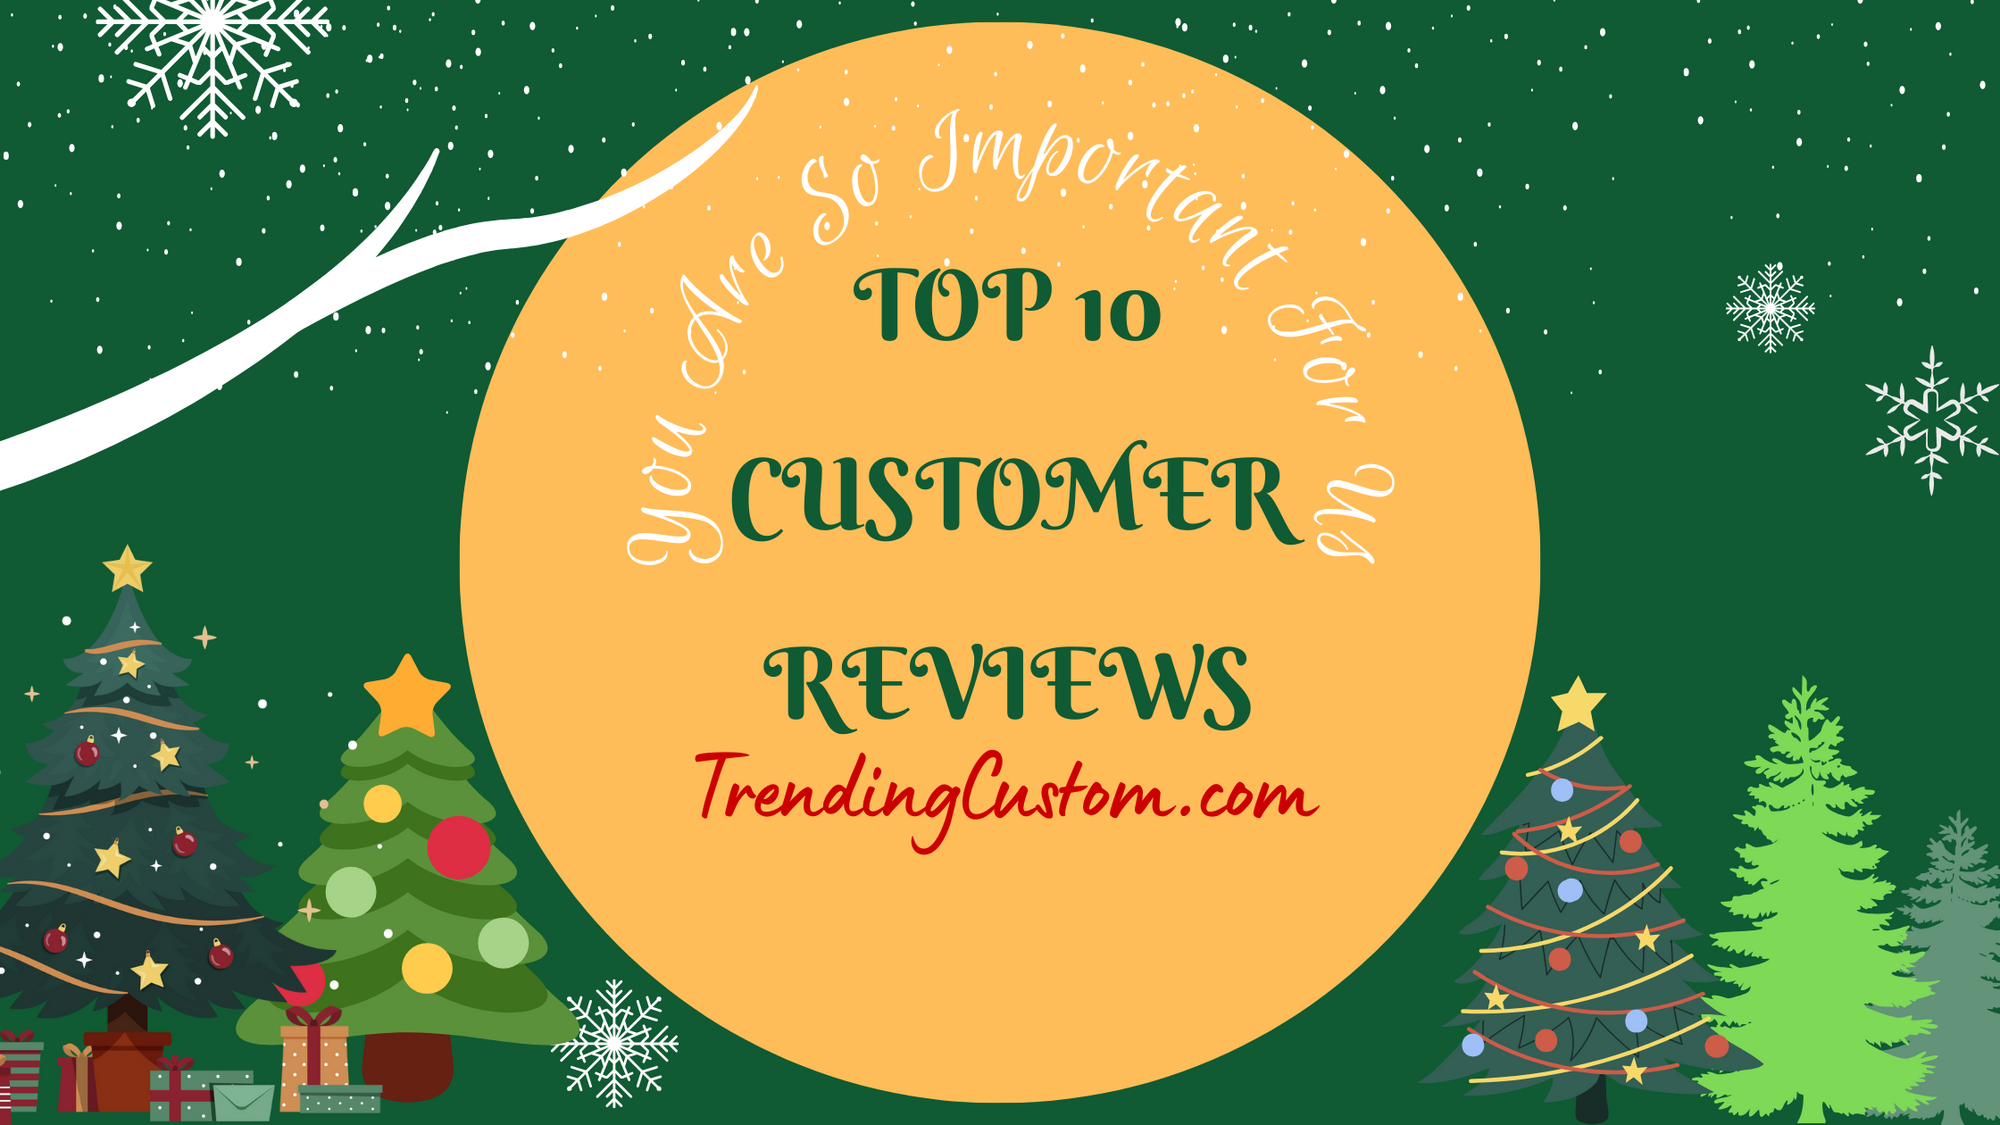 Top 10 Raving Reviews: Our Customers Speak Out! - November 10th